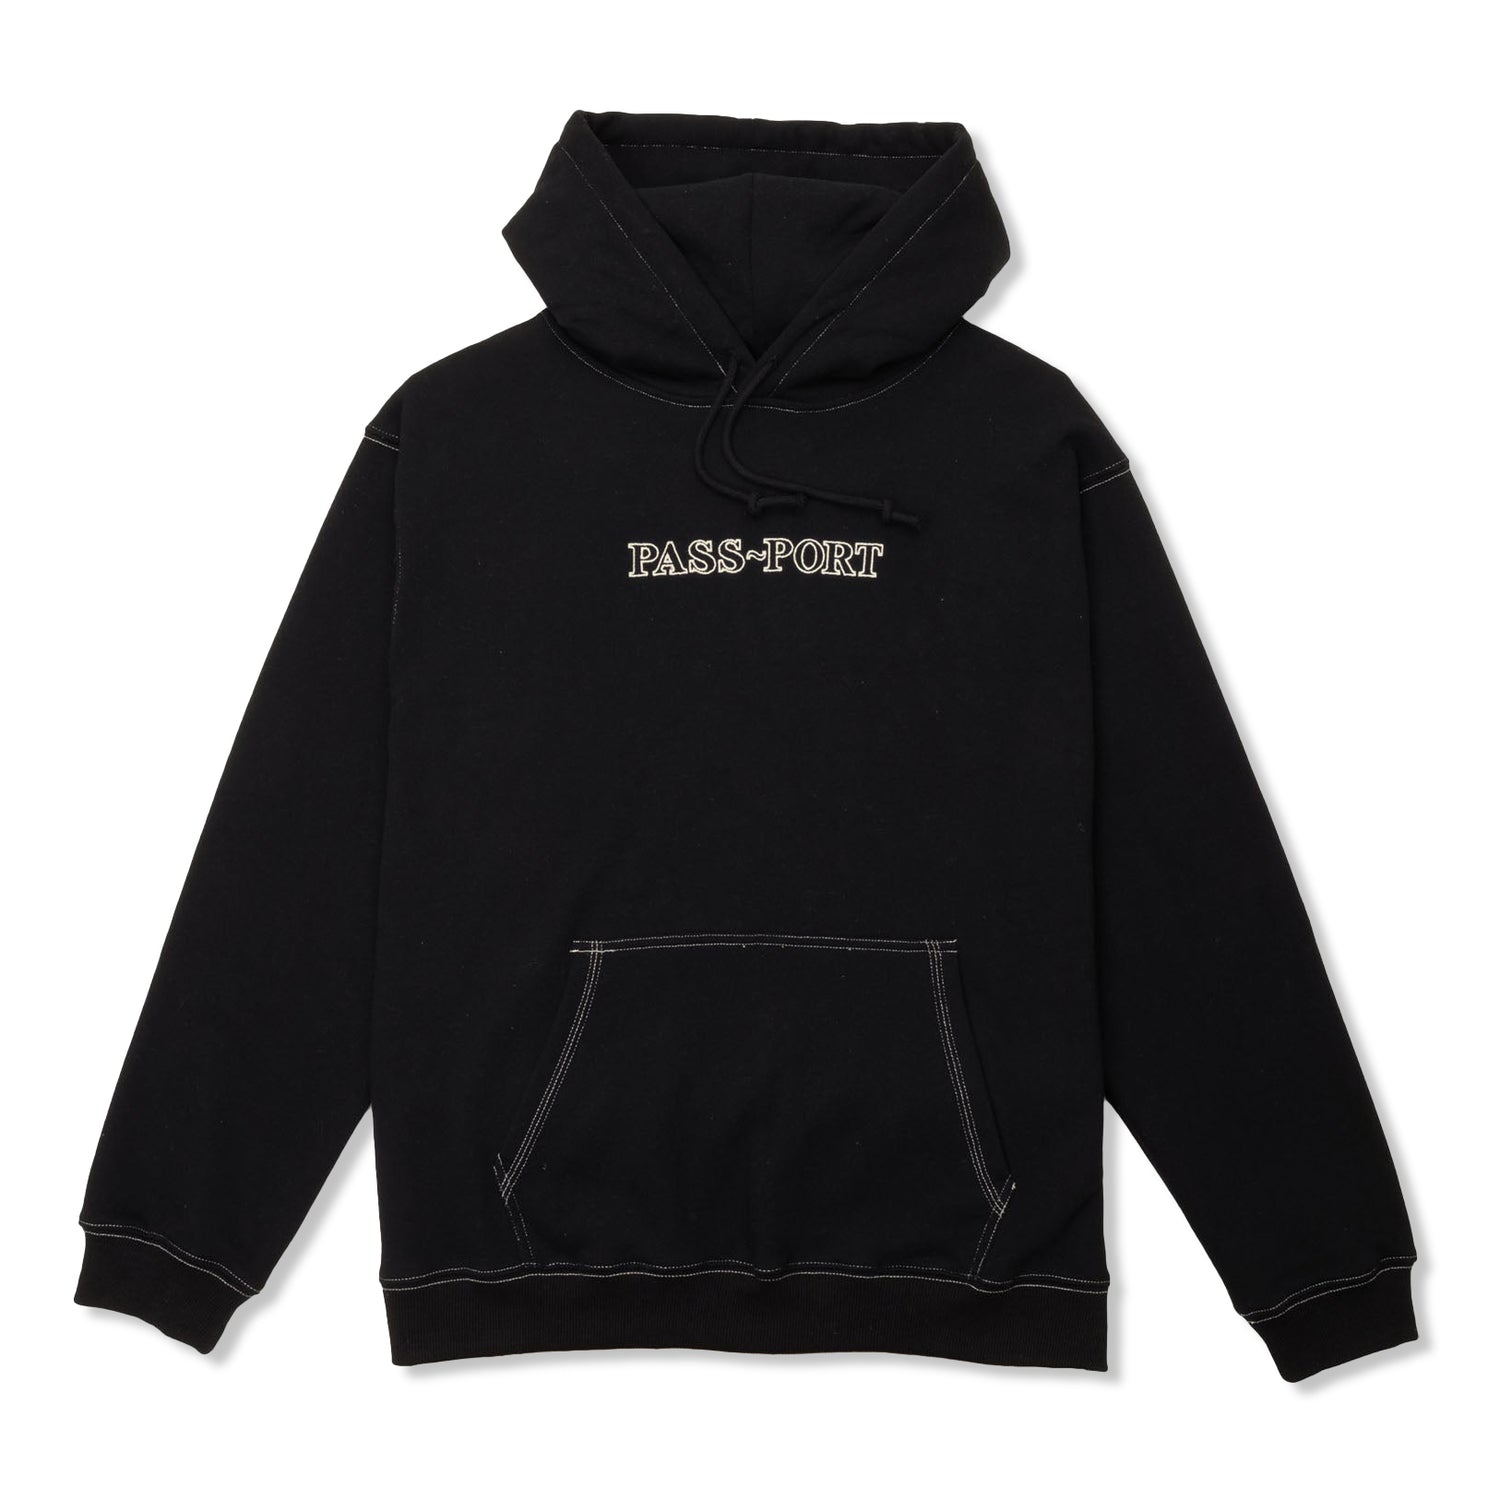 Official Organic Pullover, Black / White